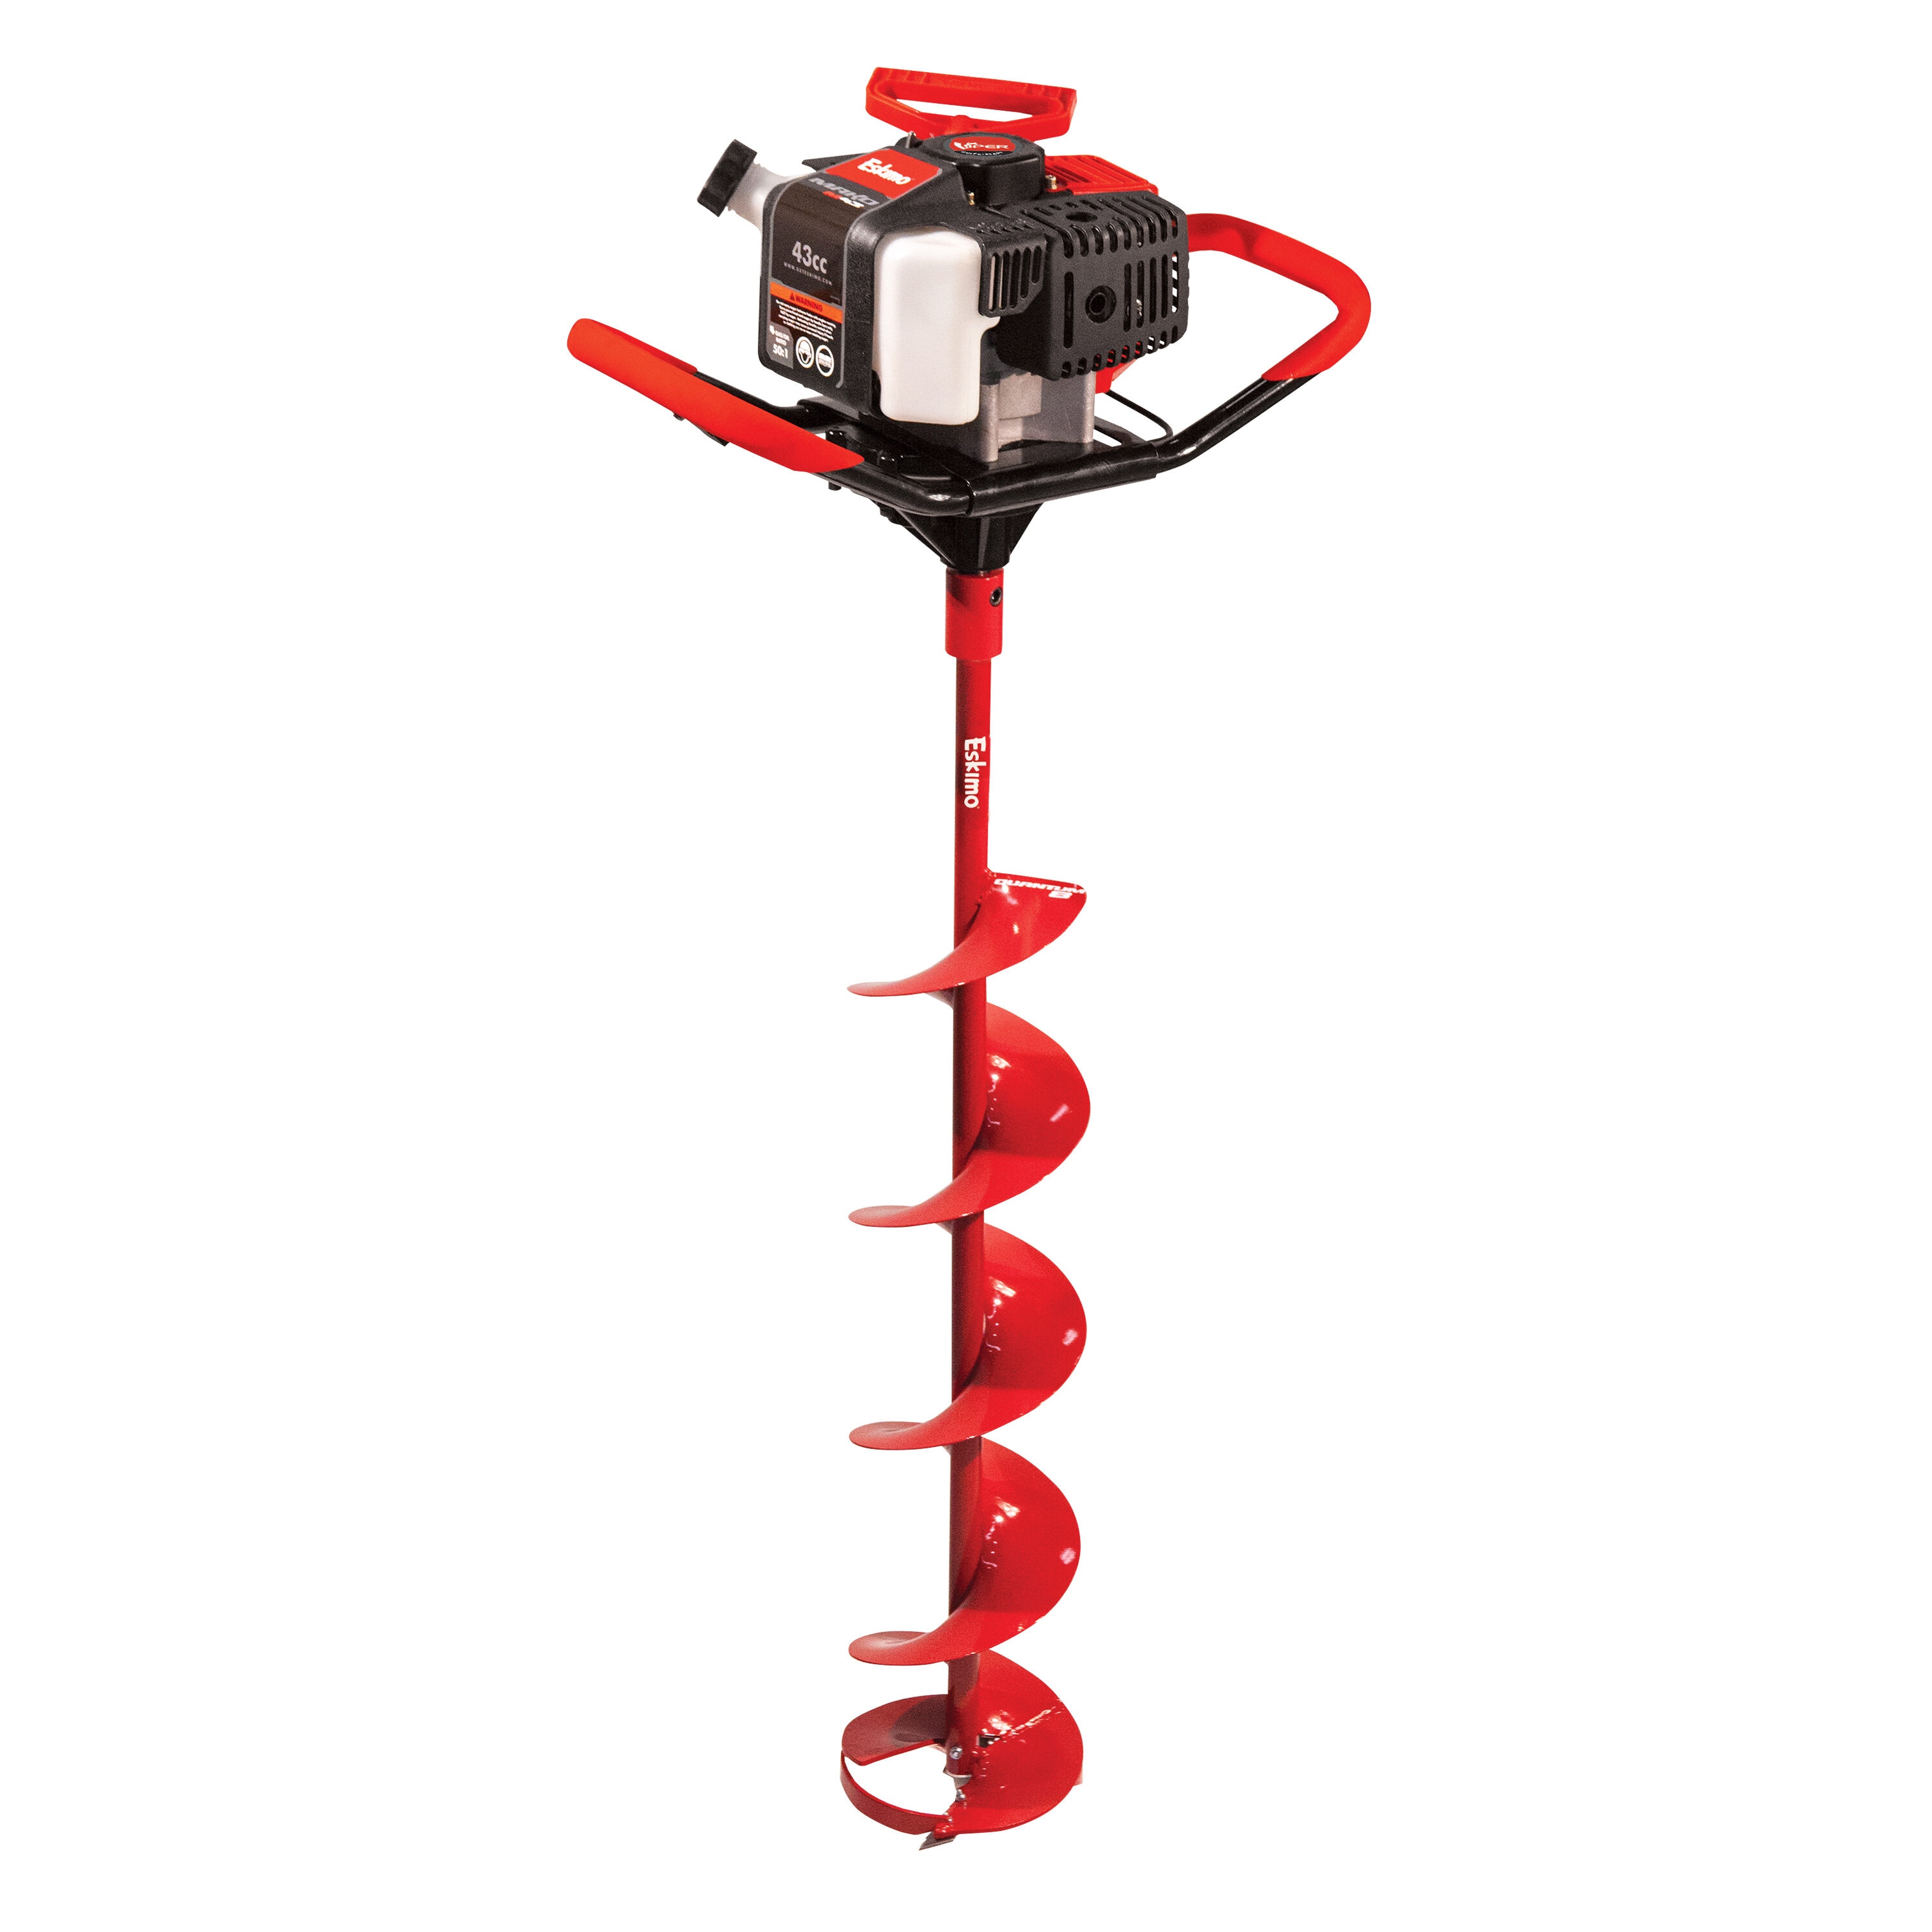 43cc Gas Powered Ice Fishing Auger, 8-inch Outdoor Tools